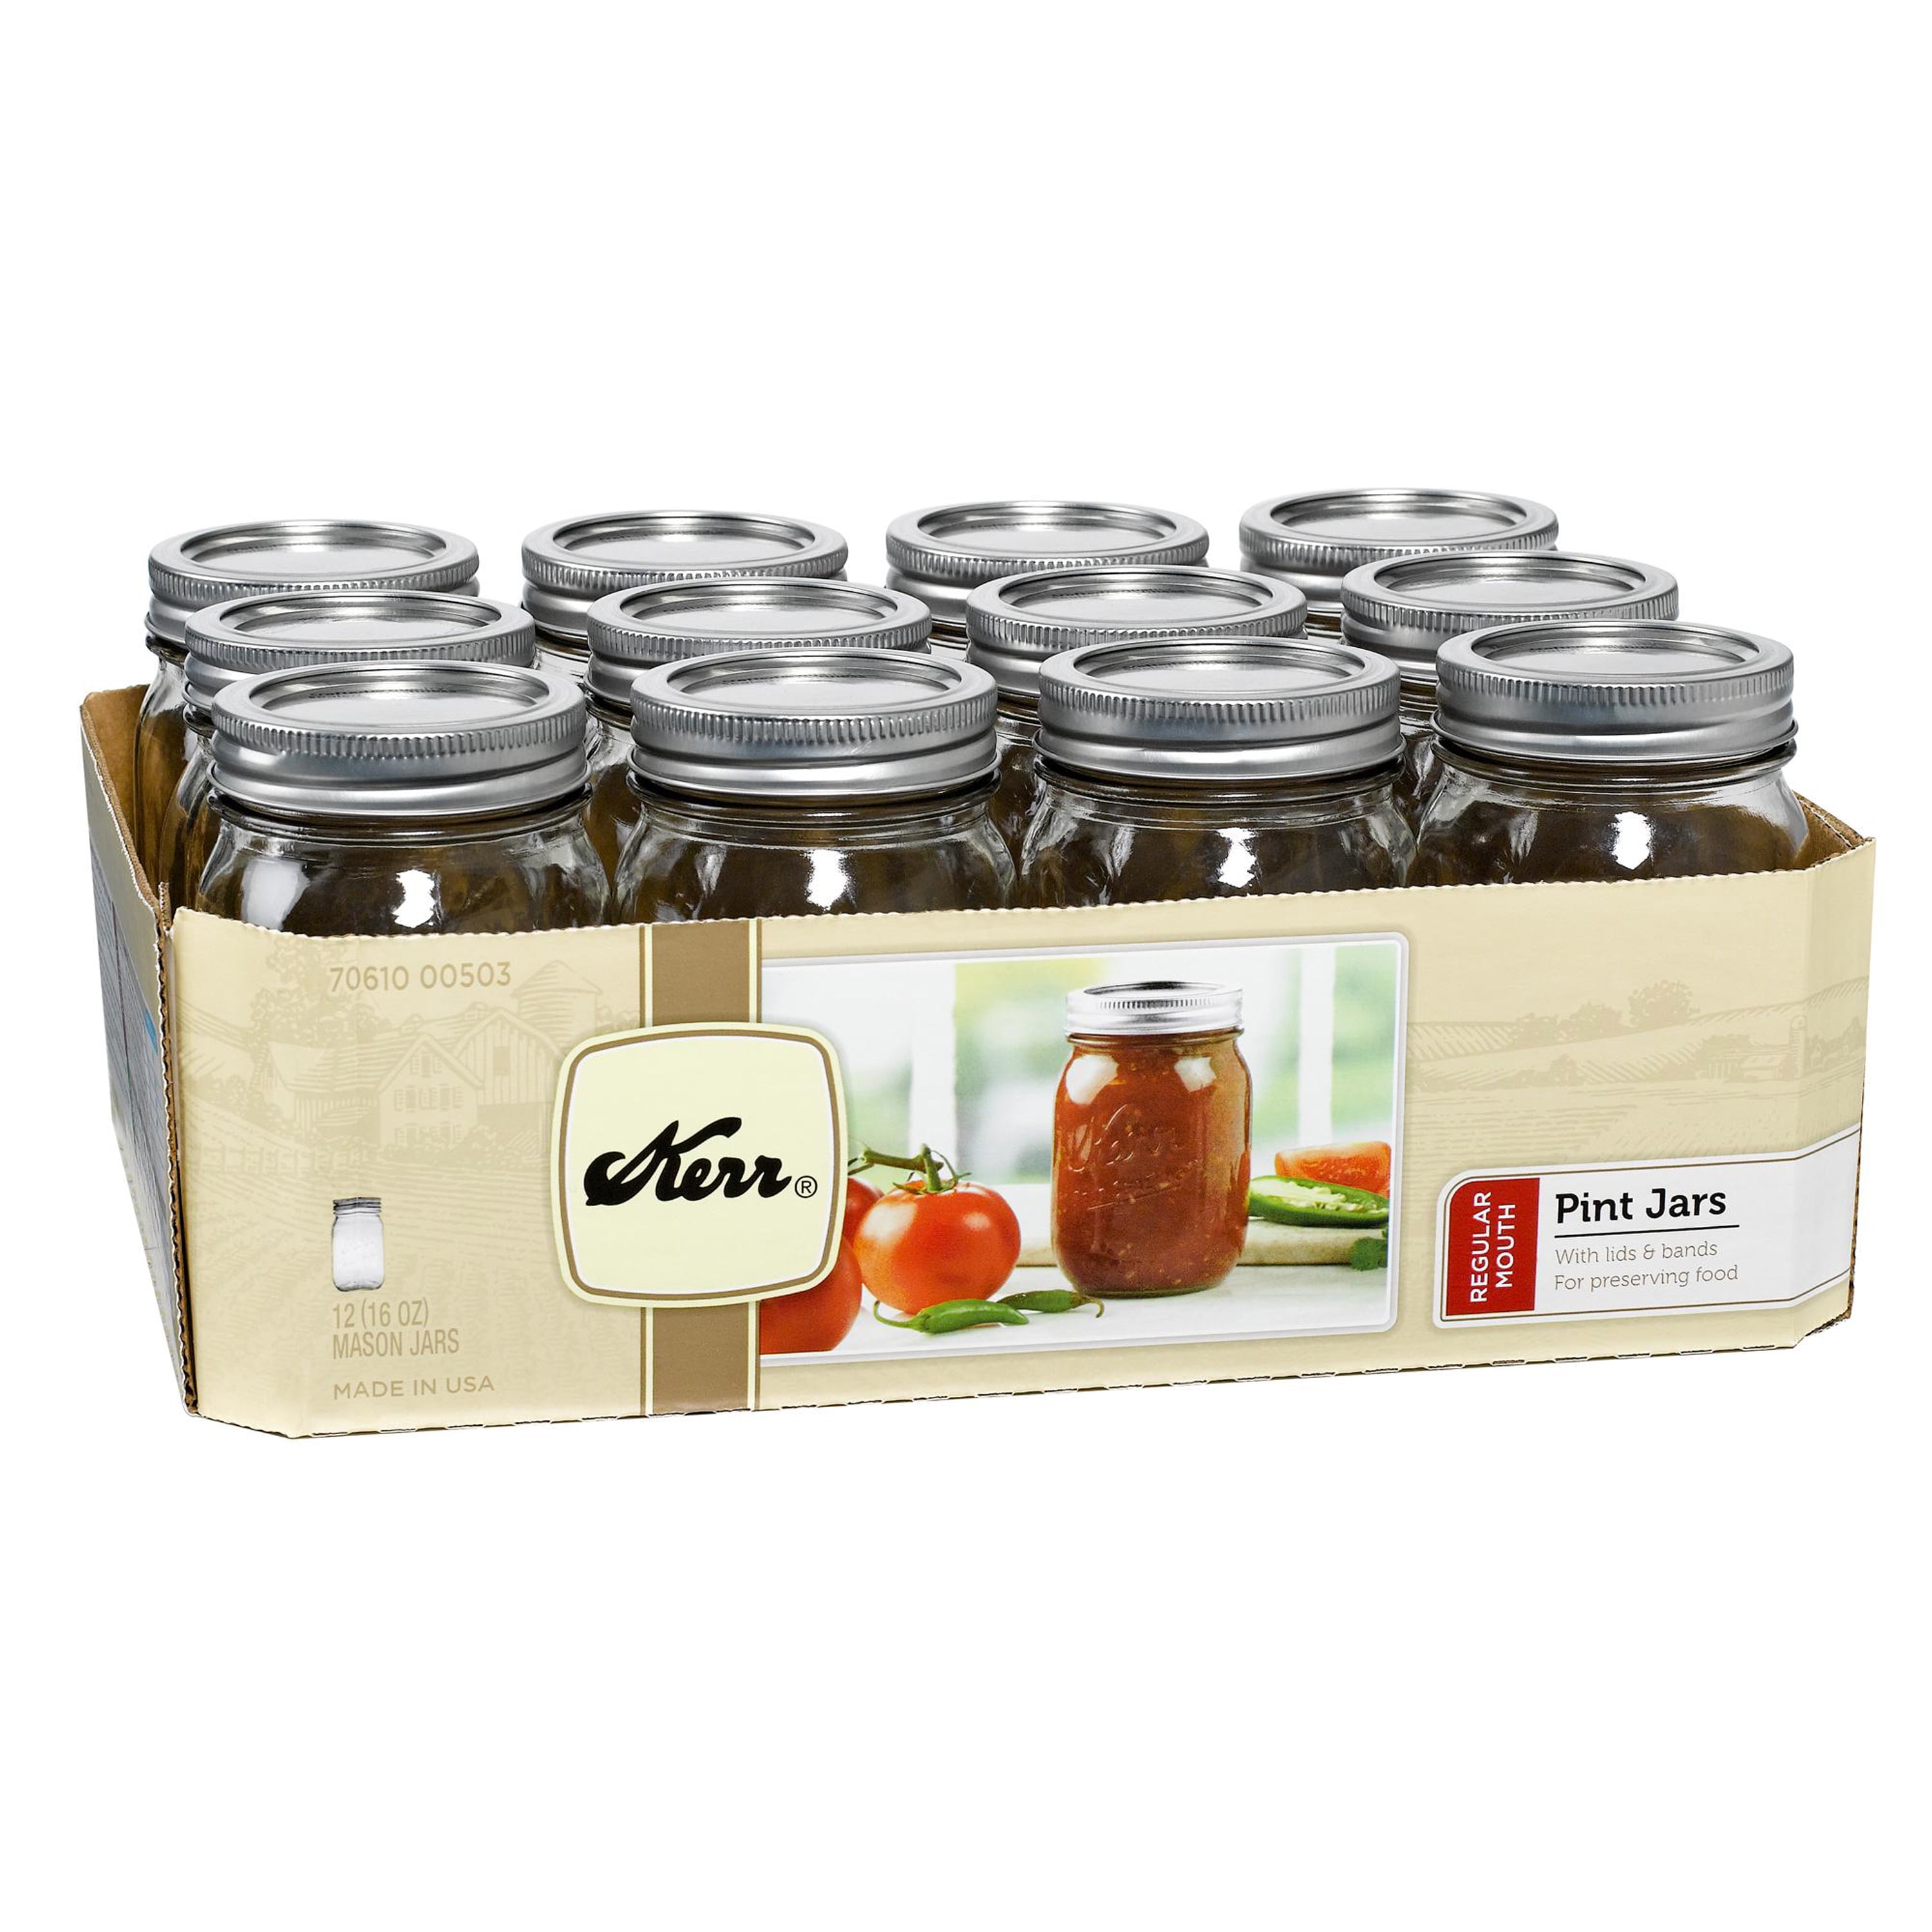 FRUITEAM 8 oz Wide Mouth Mason Jars with Lids -Set of 8, Transparent Clear  Glass Canning Jar Ideal for Jams, Jellies, Conserves, Preserves, Fruit